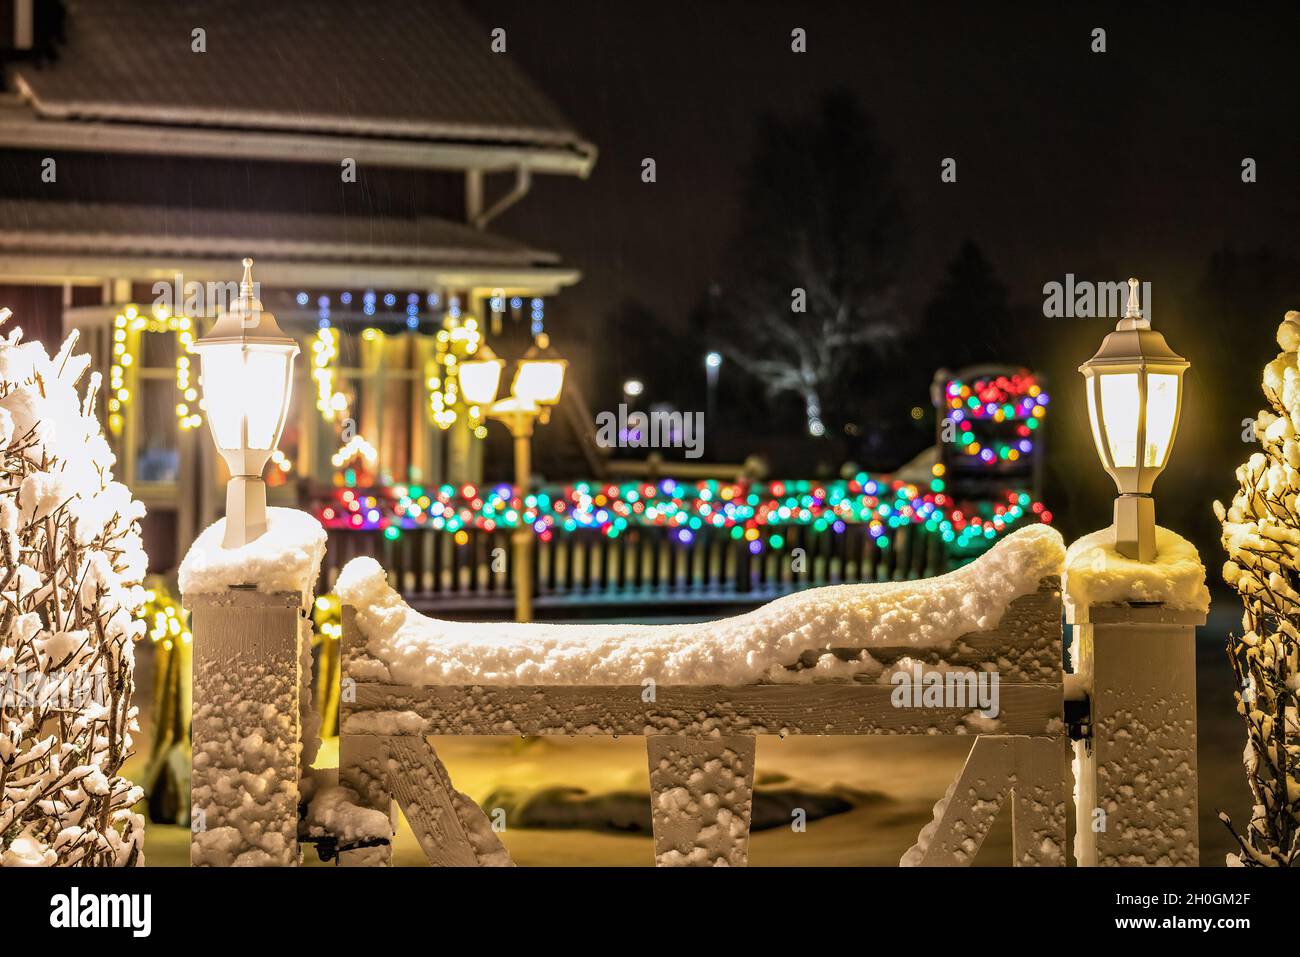 Blurry Christmas light decoration on villa and wooden fence, multicolored lights glowing. White garden gate with two white lanterns at foreground Stock Photo